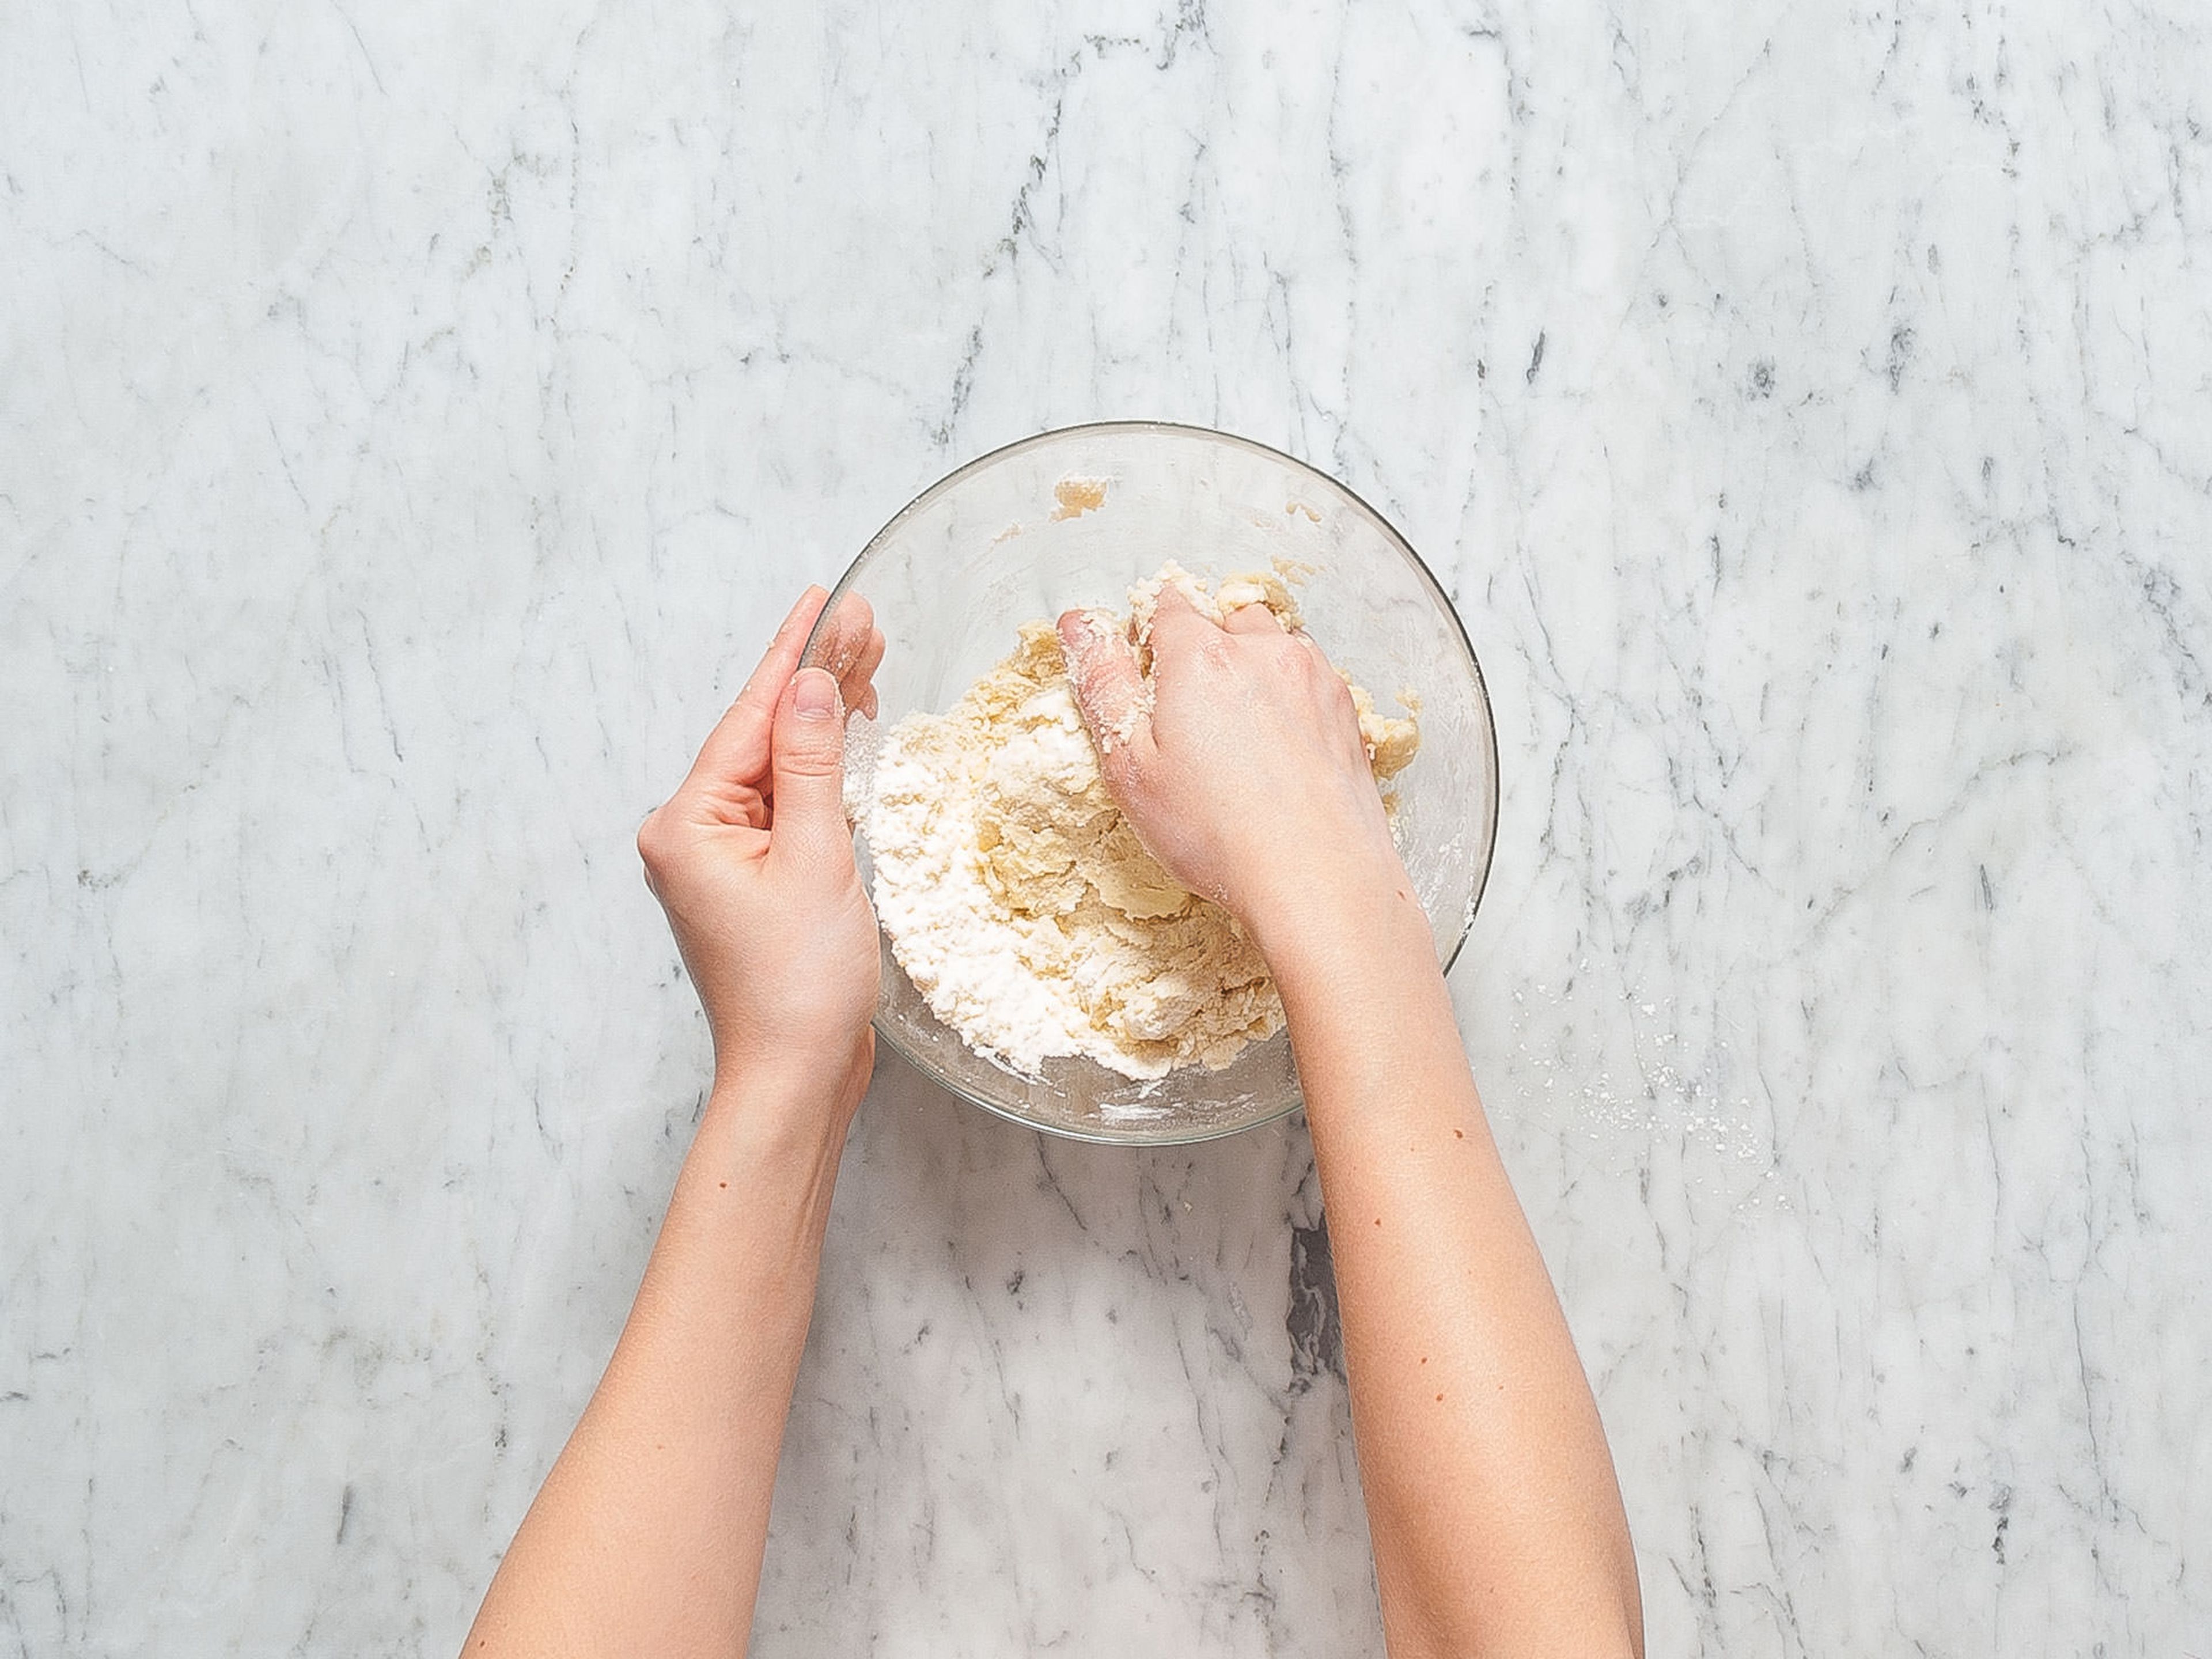 Add flour and butter to a bowl and mix until large crumbs form. Add sugar, salt, and lemon zest and stir to combine. Add egg and continue to mix until a smooth dough forms. Wrap dough in plastic foil and refrigerate for approx. 60 min.